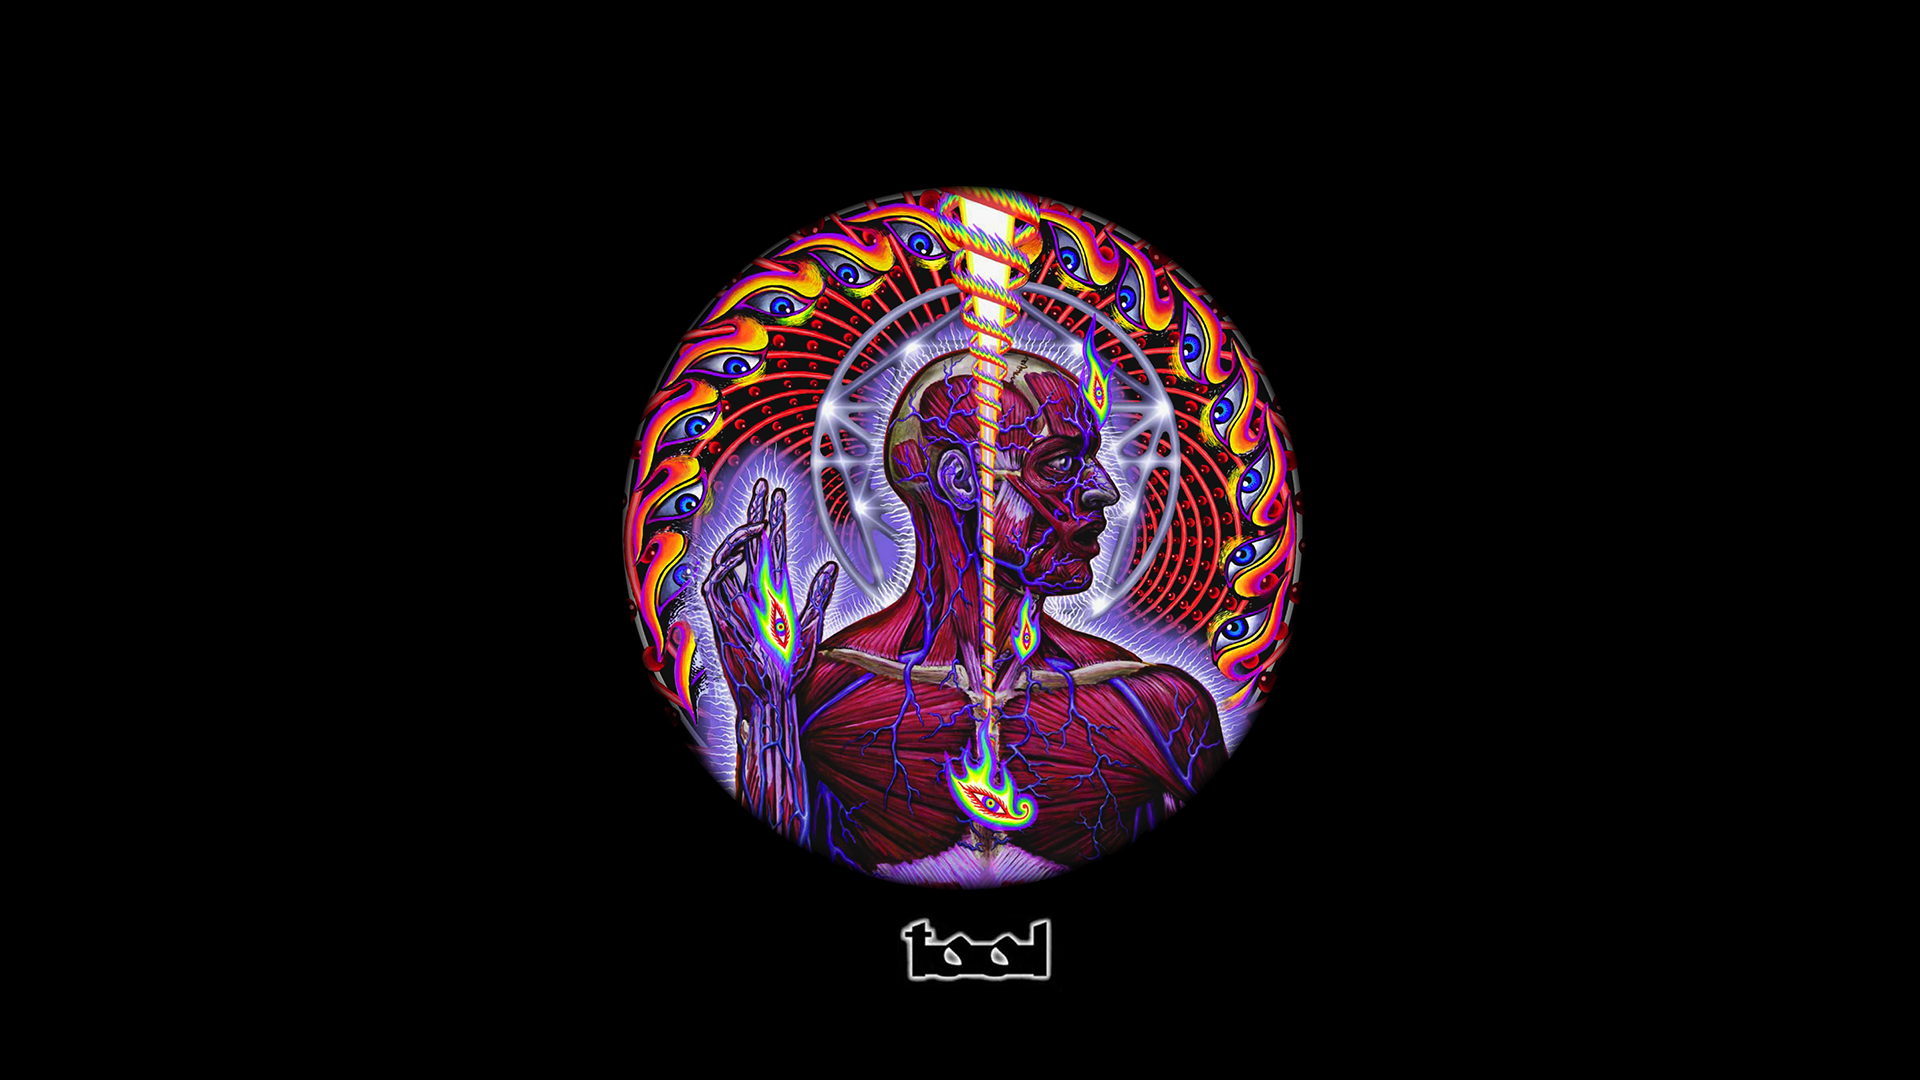 Lateralus wallpaper for FHD